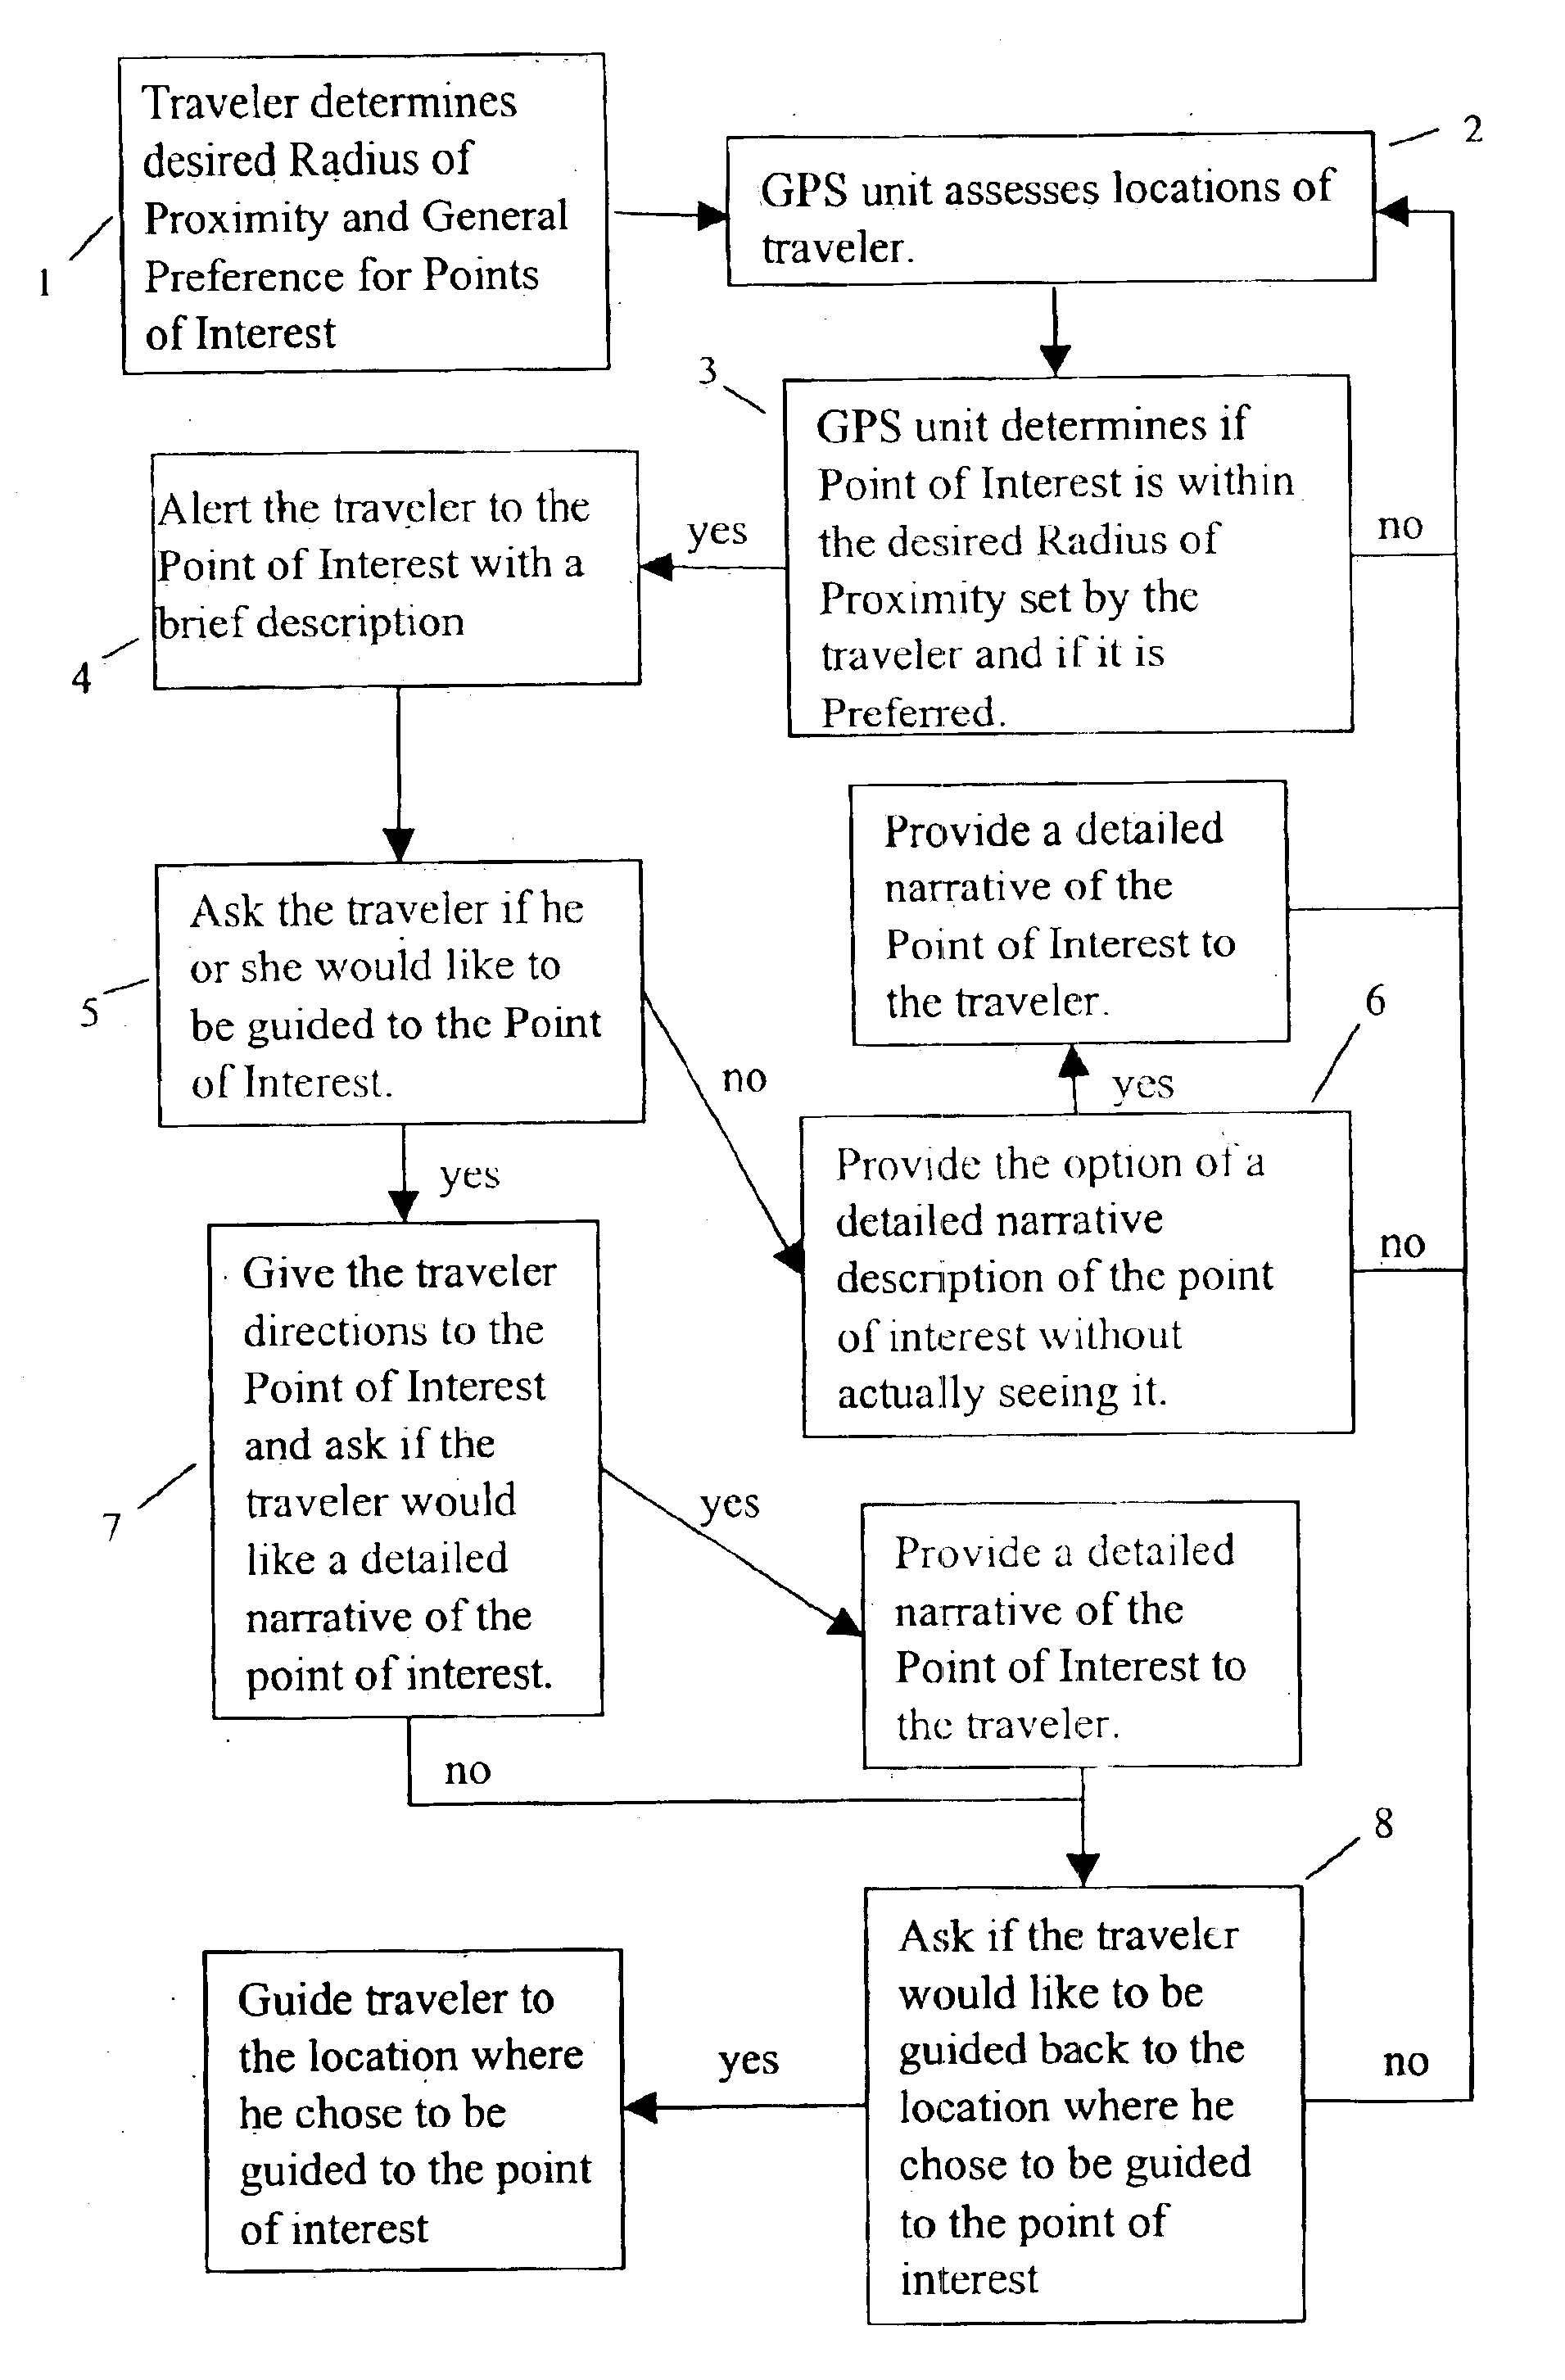 Method and system for providing narrative information to a traveler